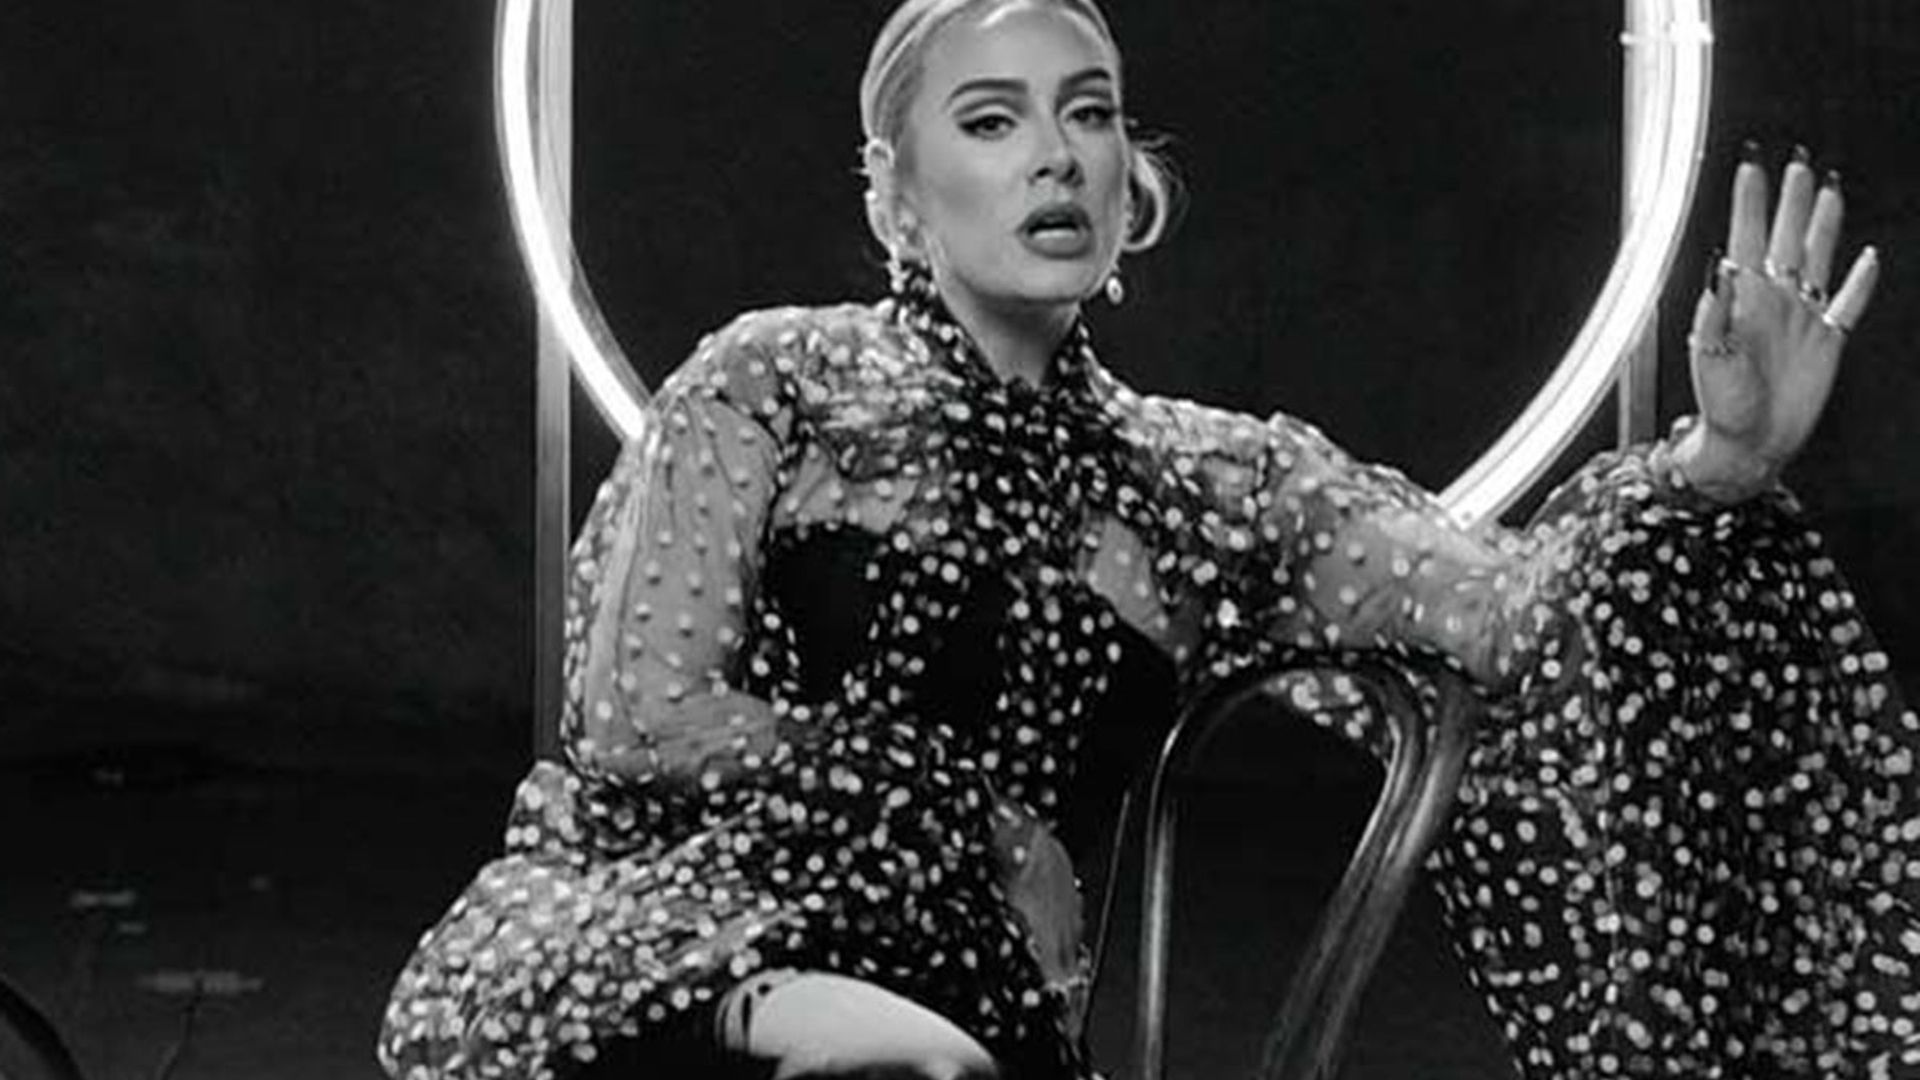 Adele wows in unbelievable tulle heels in 'Oh My God' music video